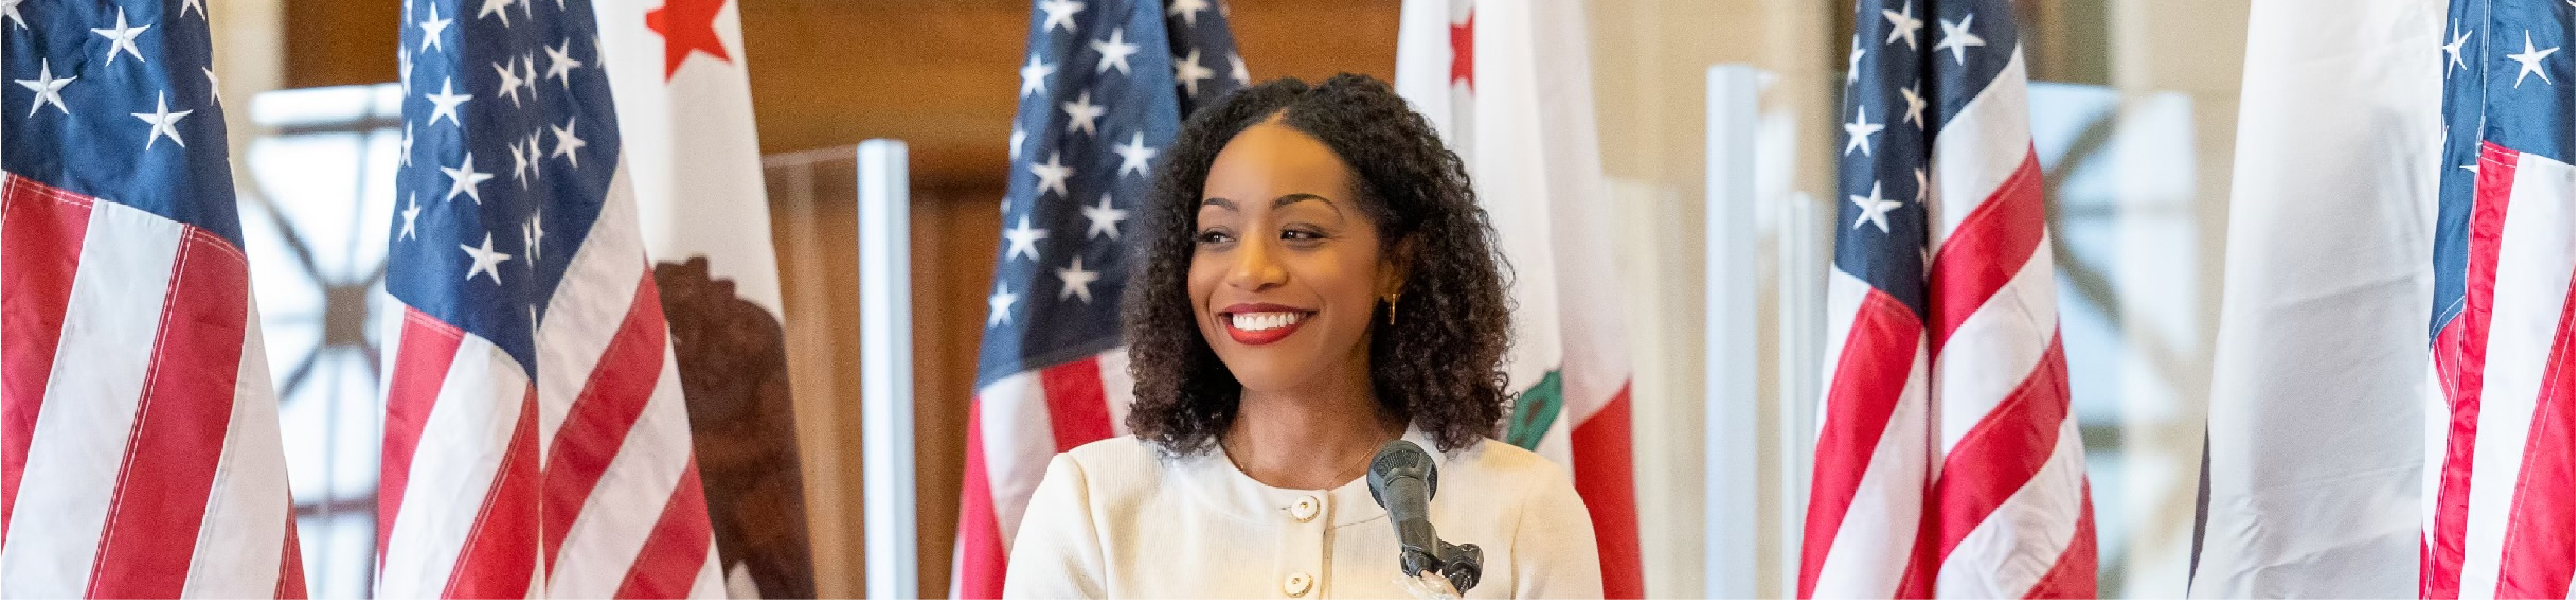 image of Controller Cohen at her inauguration